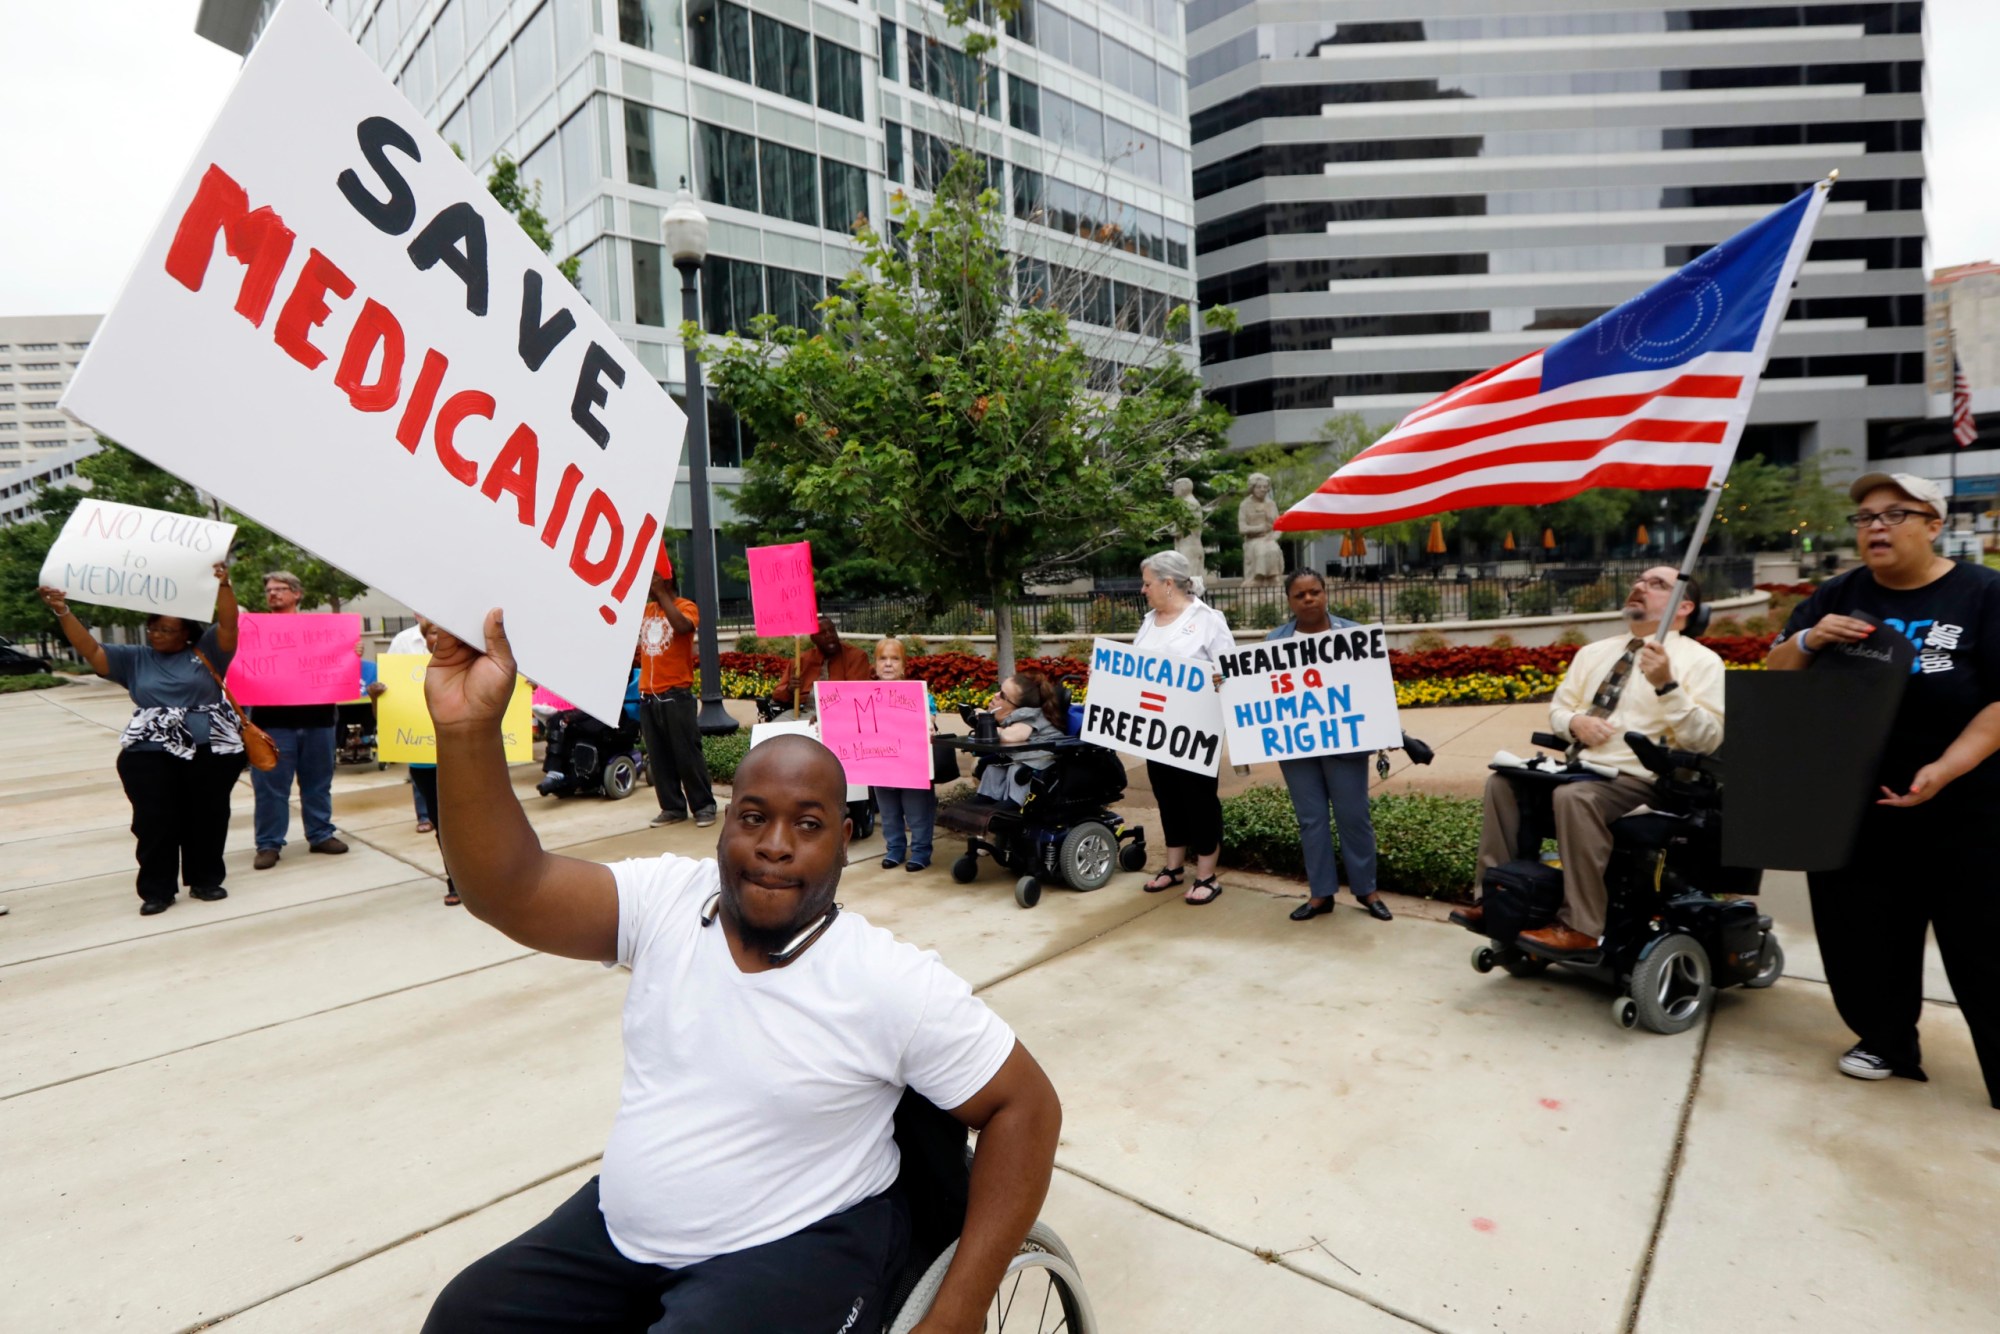 Medicaid recipients and their supporters stage a protest outside the building that houses the offices of U.S. Sen. Thad Cochran (R-MS). (AP/Rogelio V. Solis)